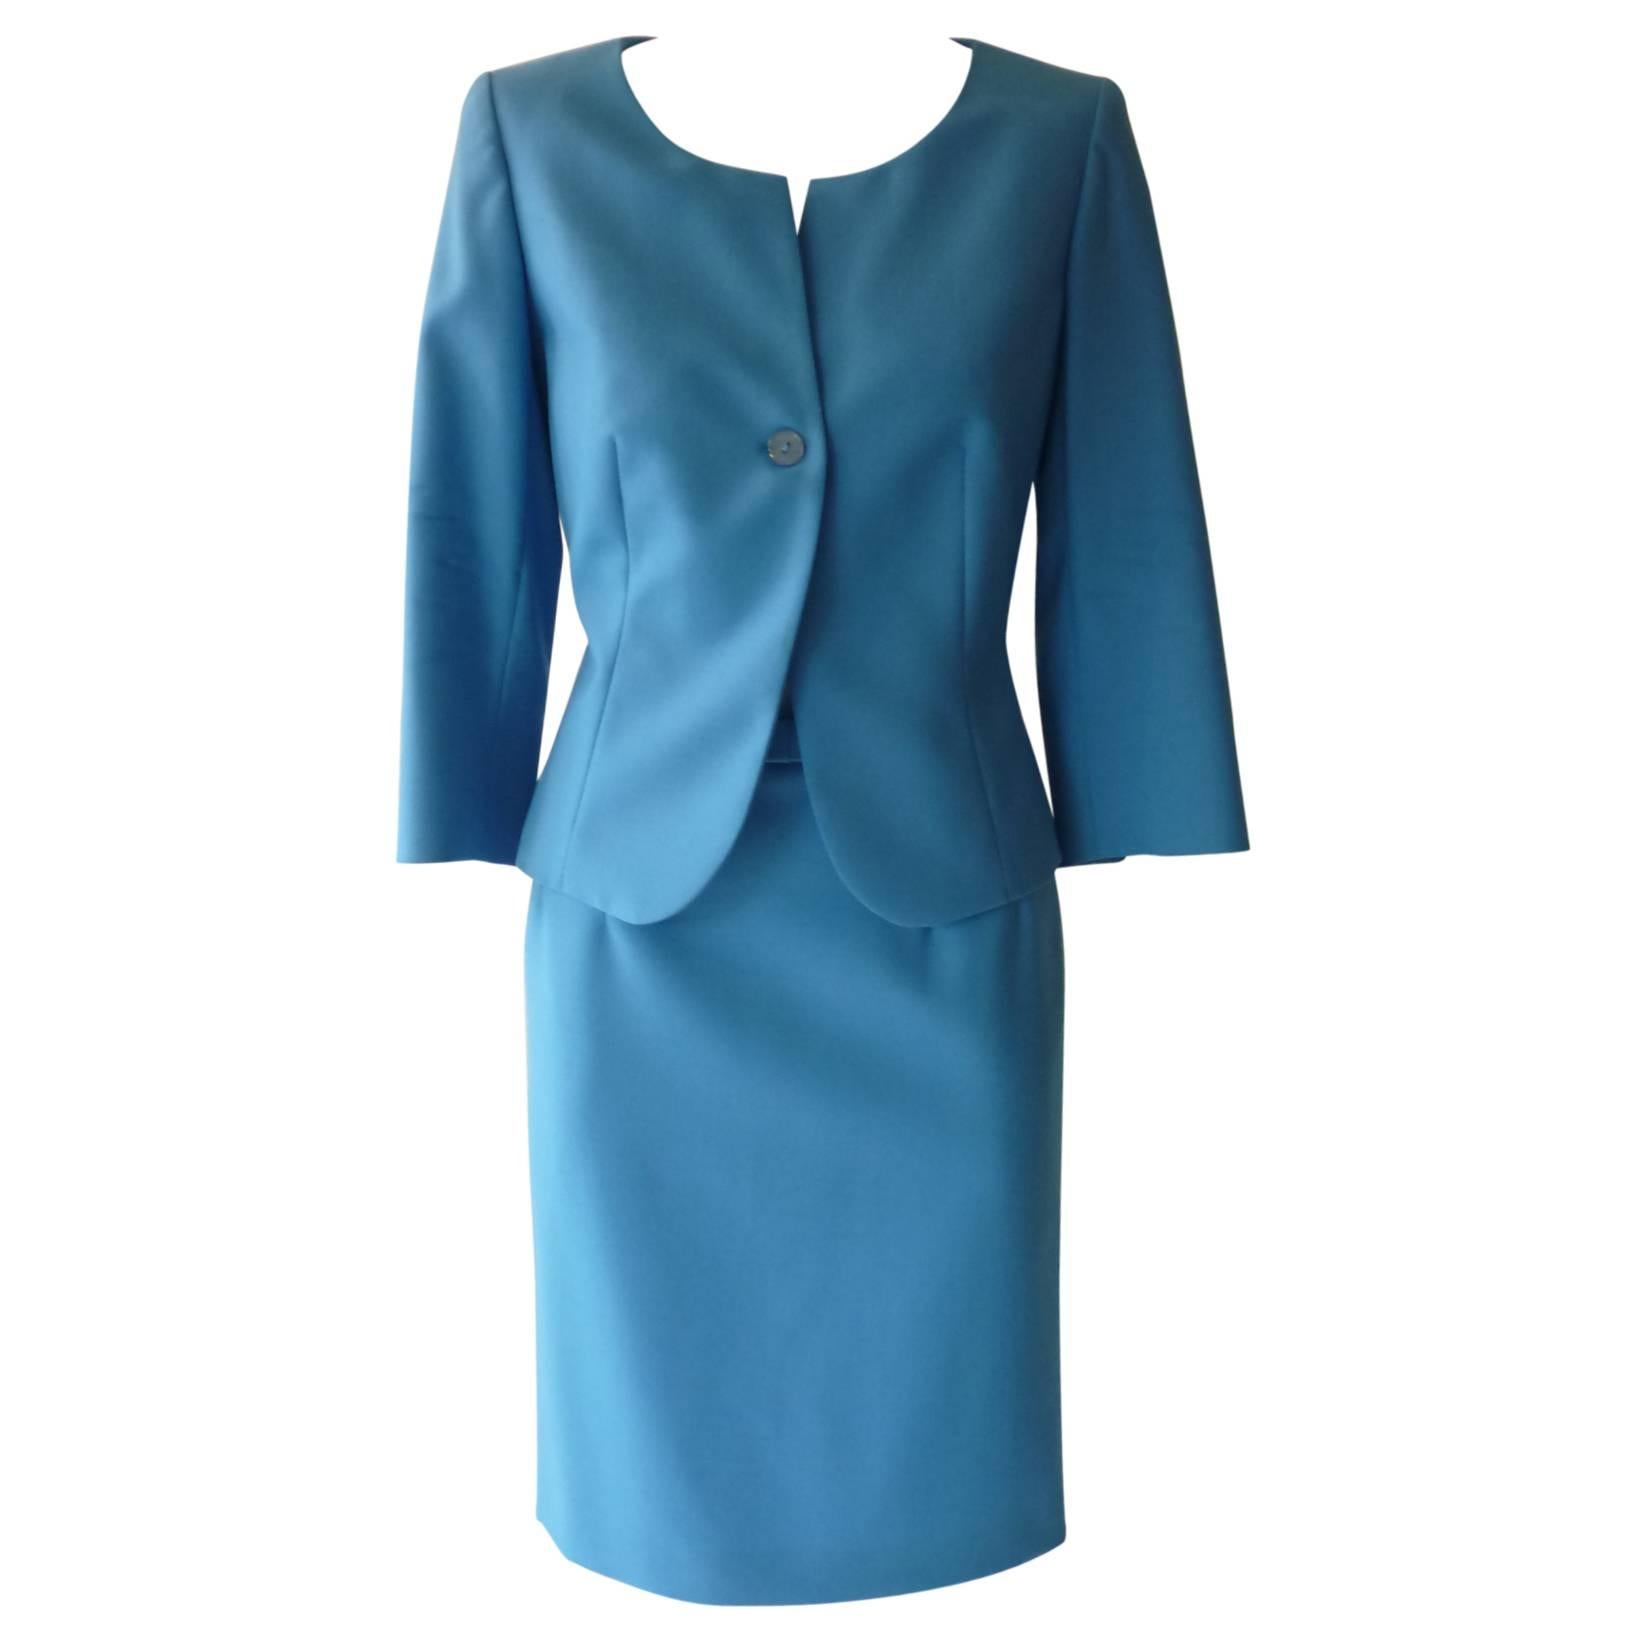 Georges Rech Aqua Blue Wool and Mohair Skirt Suit